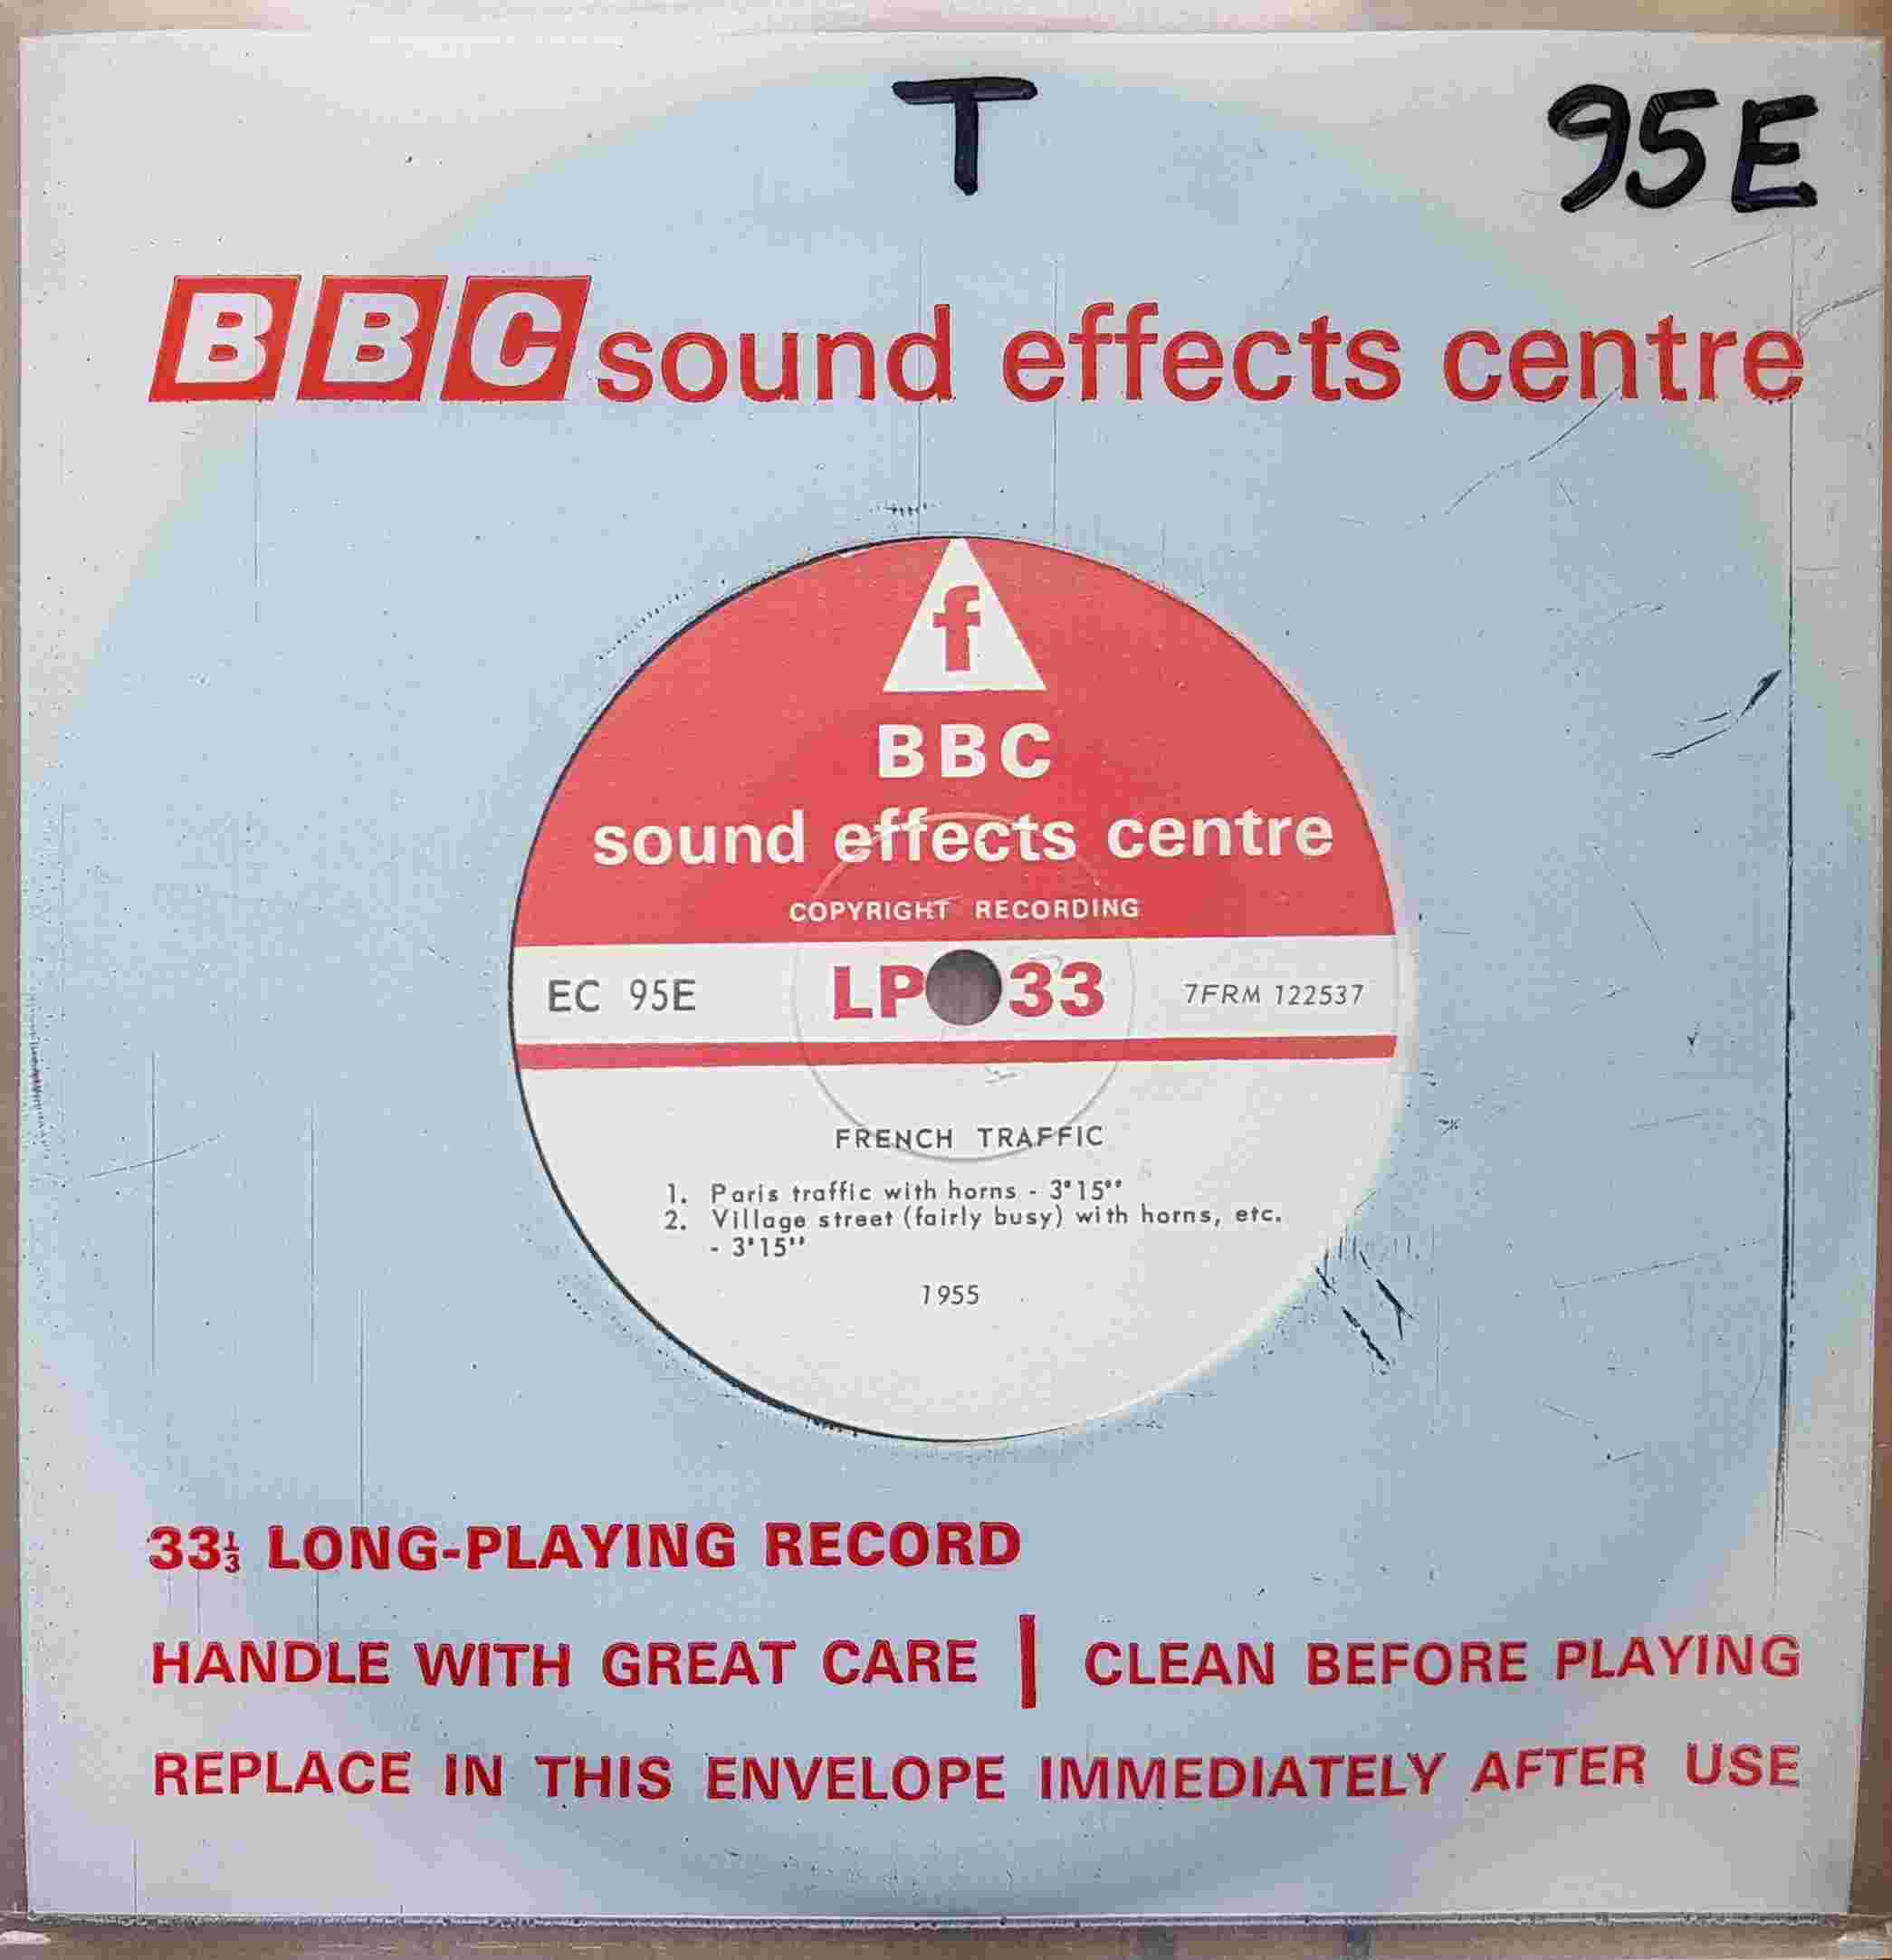 Picture of EC 95E French traffic by artist Not registered from the BBC records and Tapes library